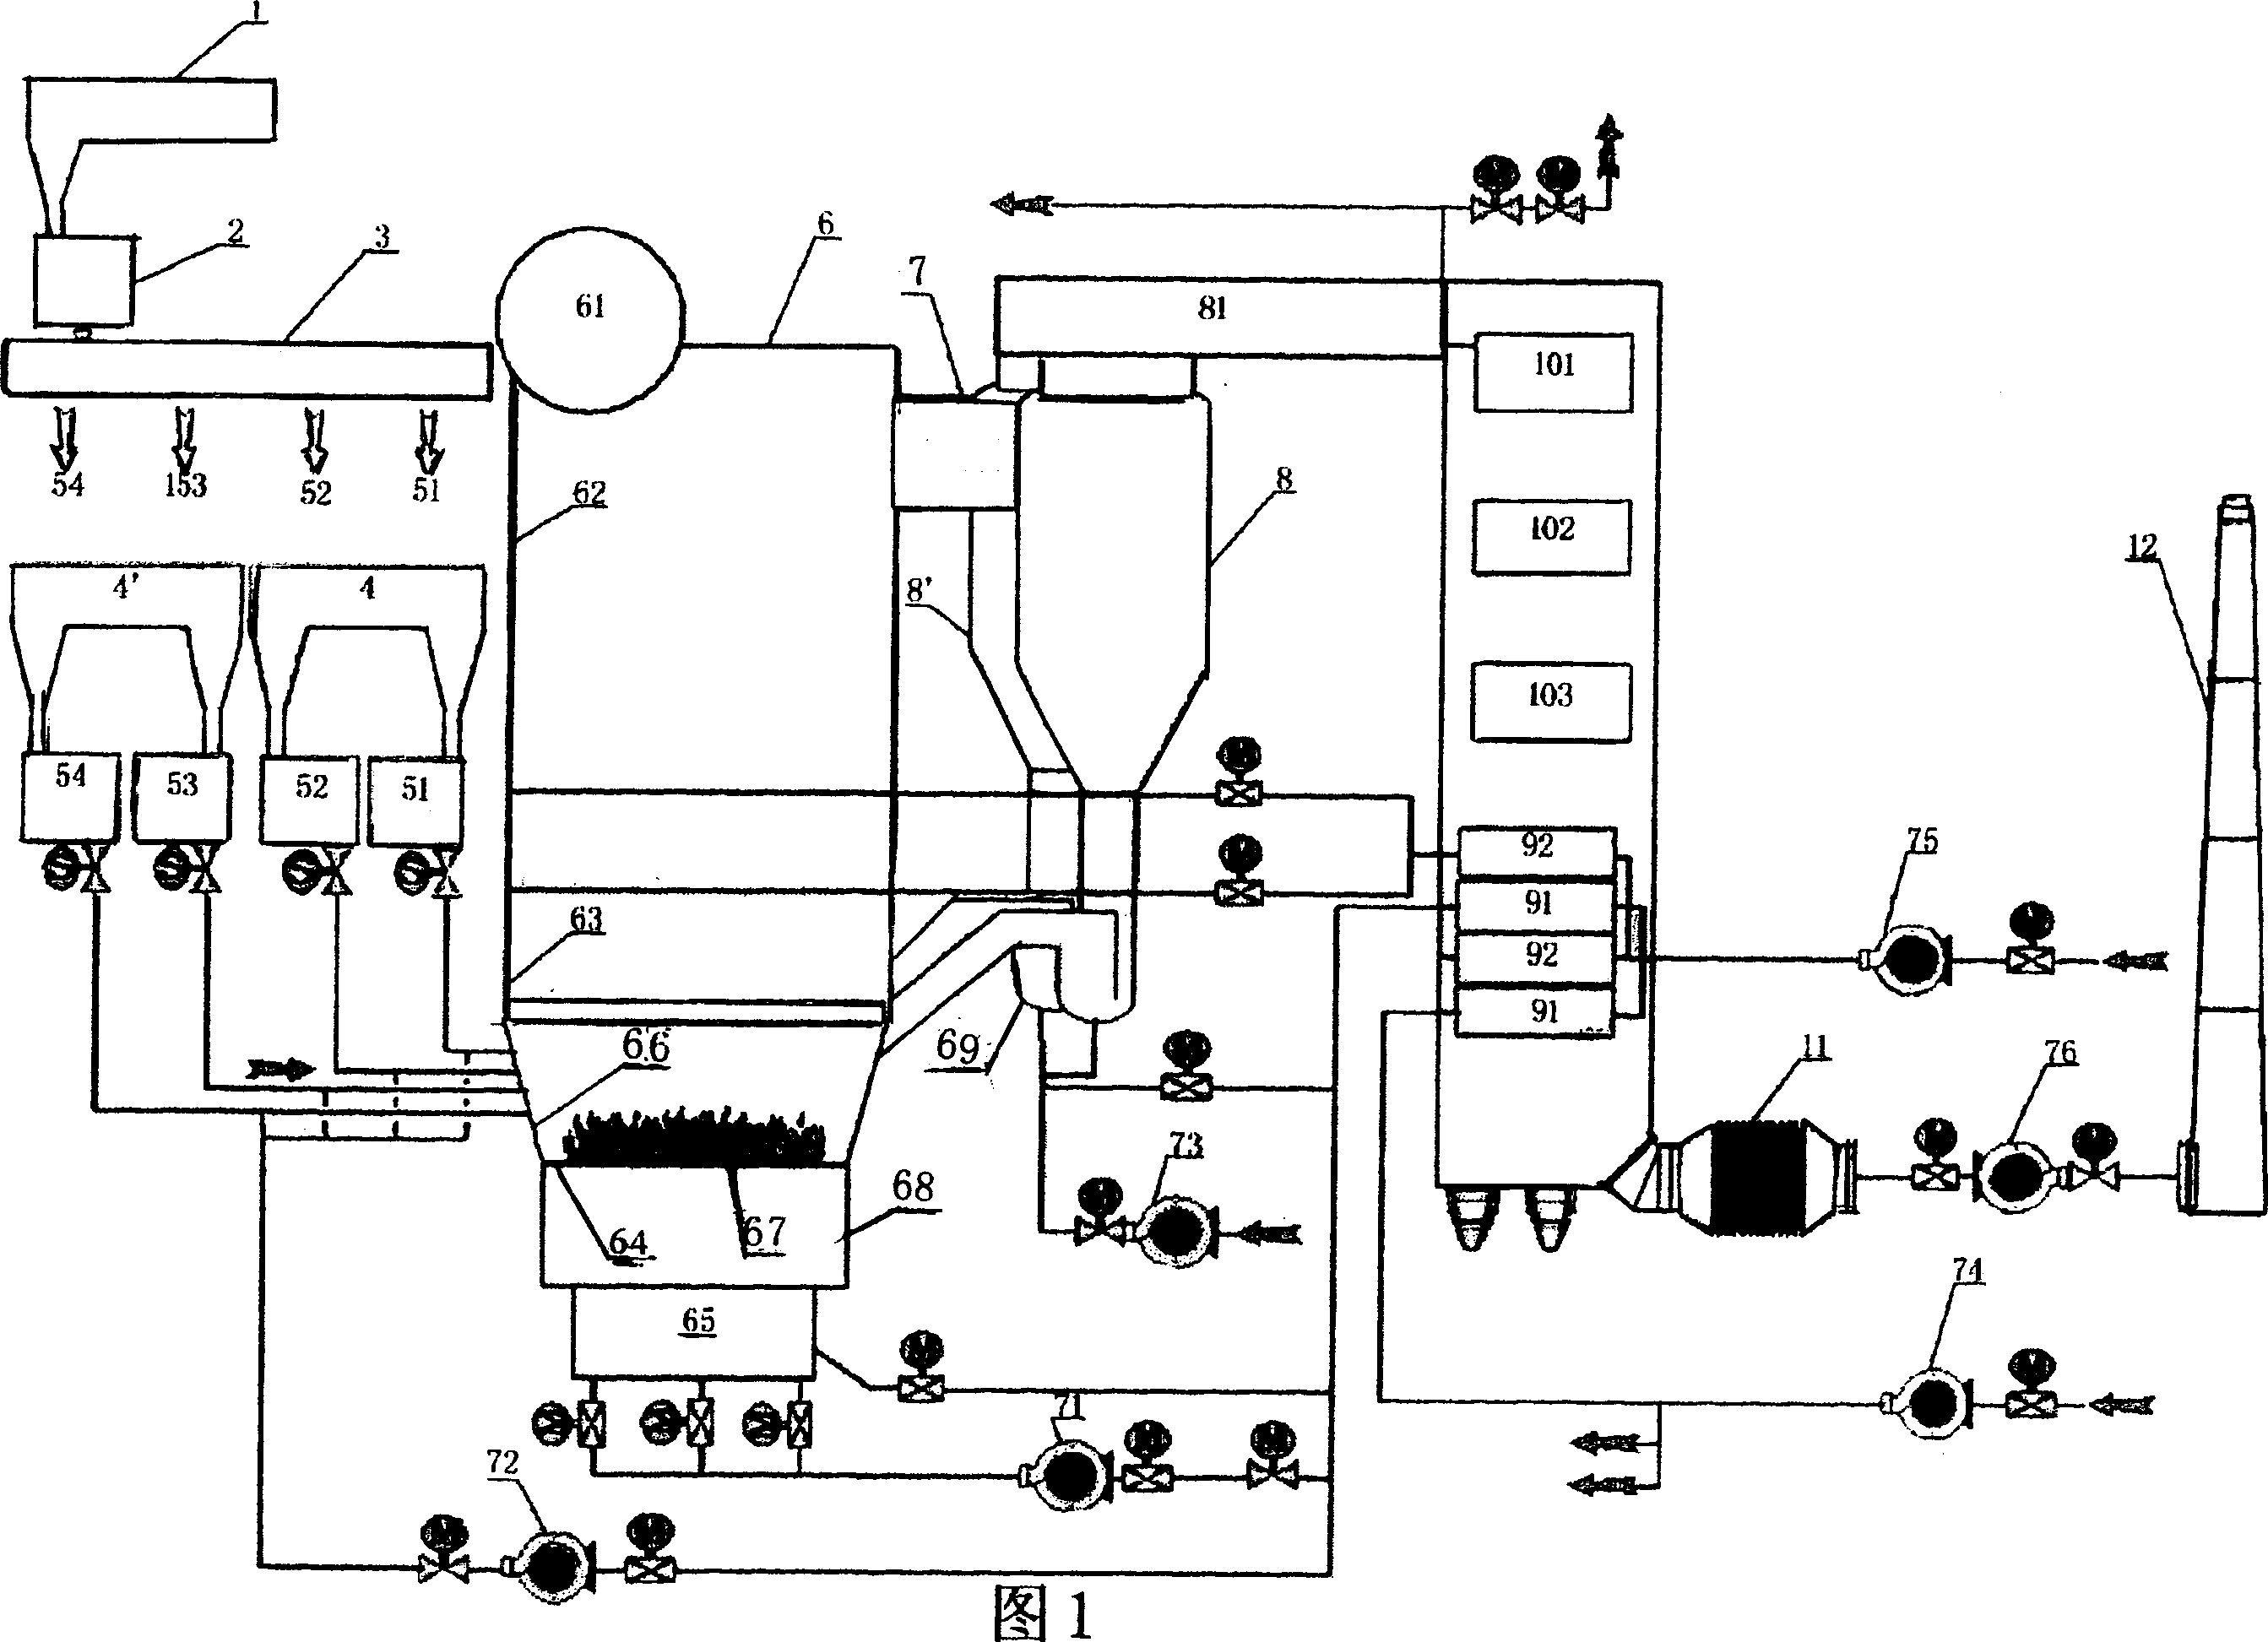 Burning device and process for oil shale fluidized bed